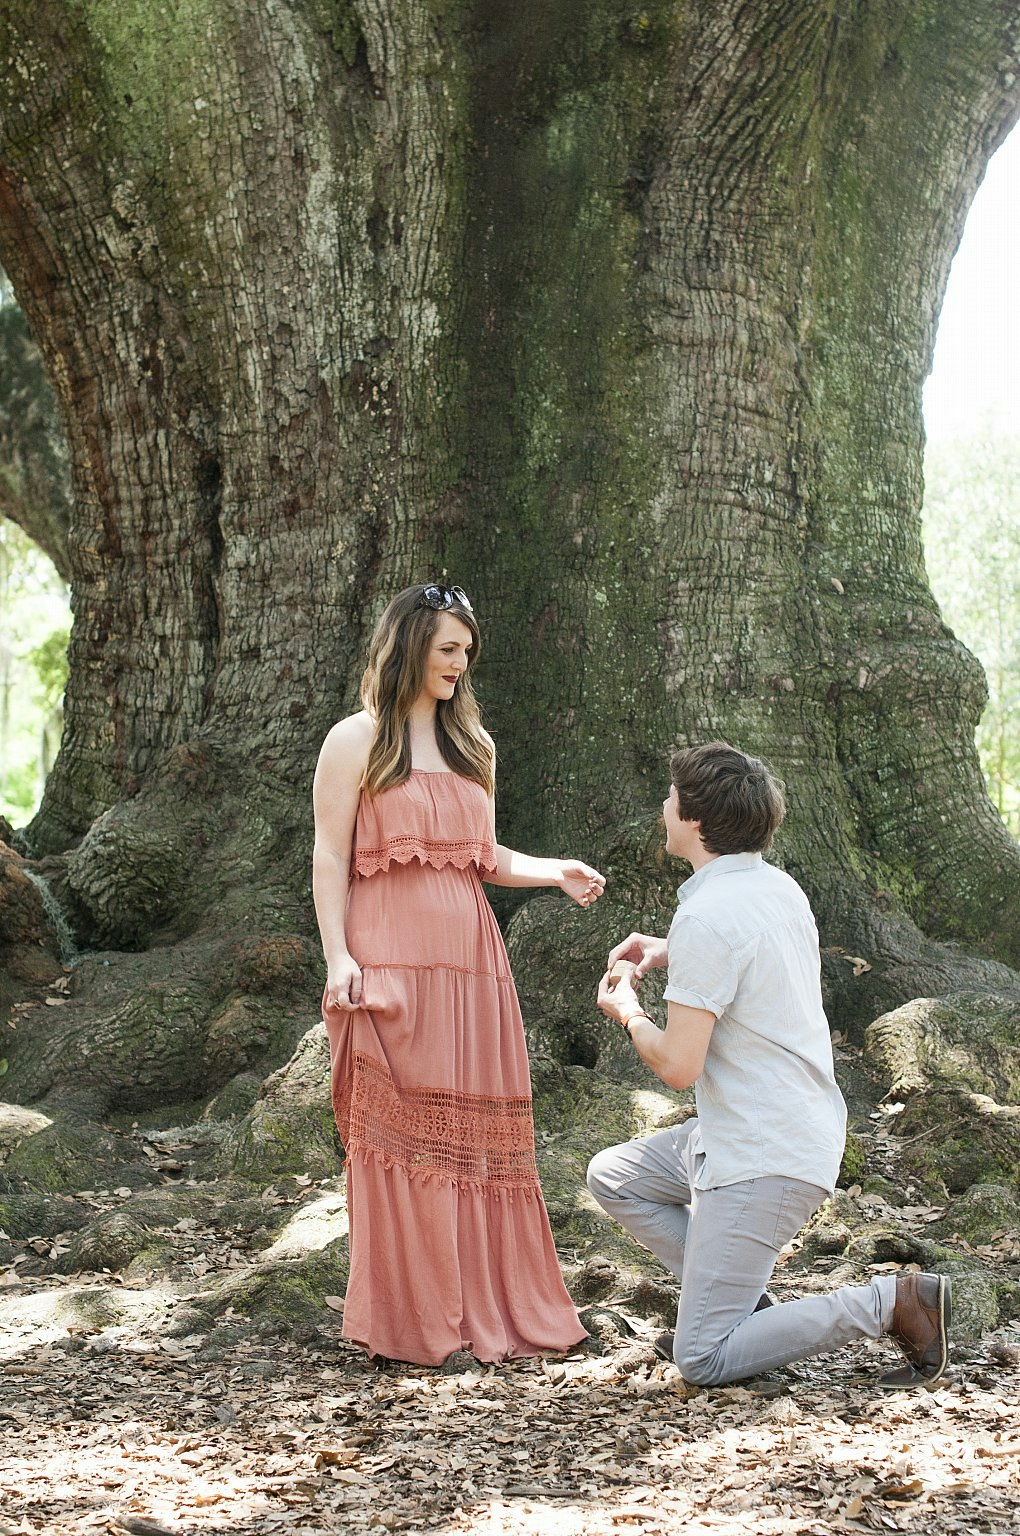 Lonely Planet staffer Dustin is on one knee proposing to his girlfriend Liz next to an enormous old tree in Audubon Park, New Orleans.